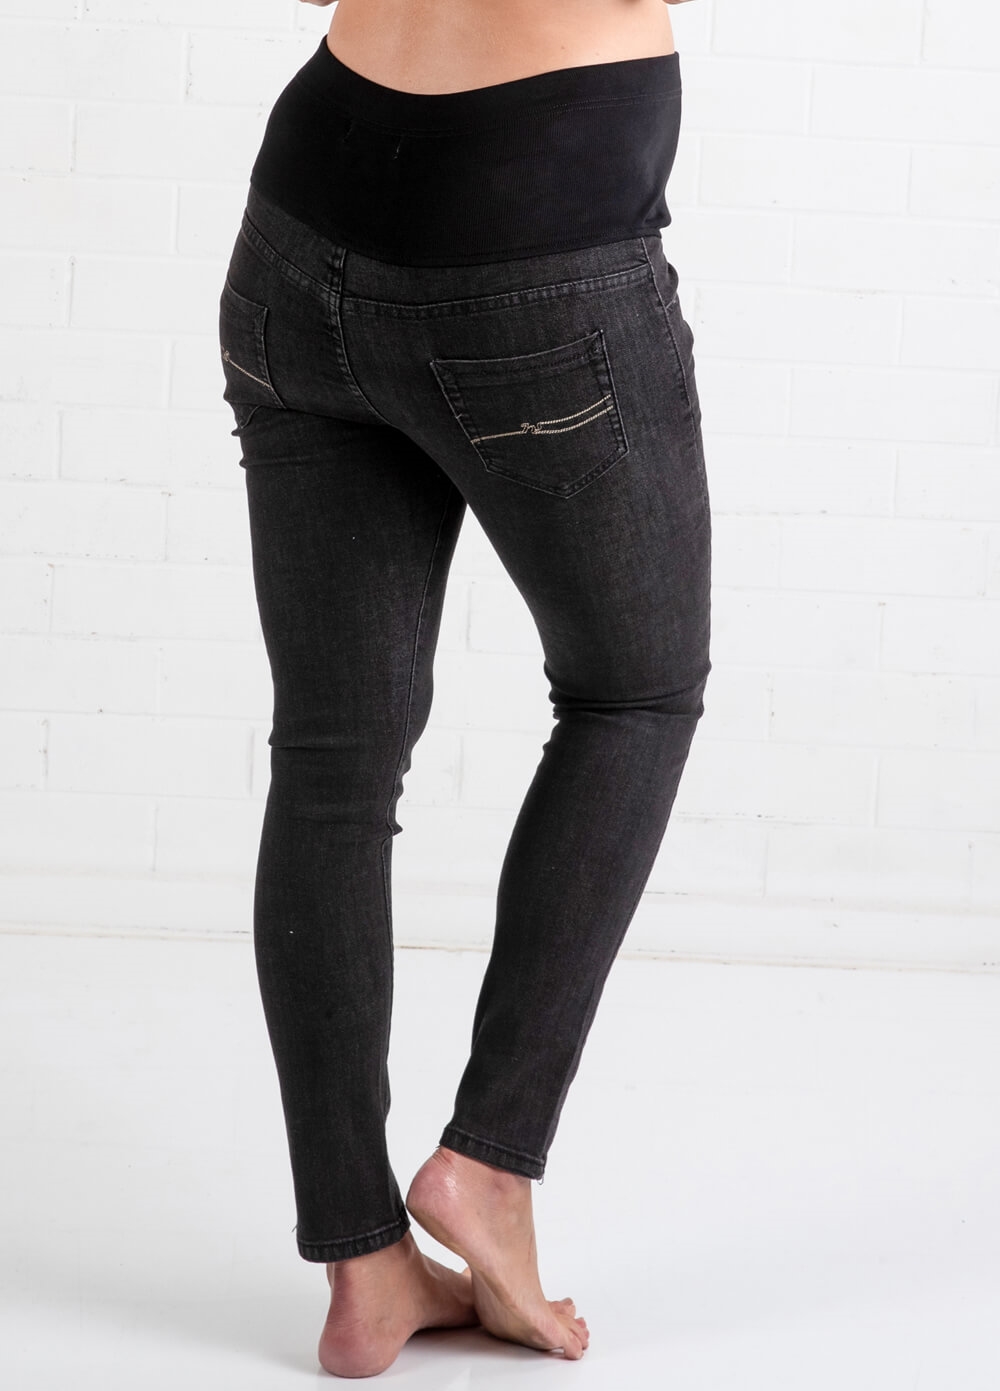 Lait & Co - Christophe Ankle Maternity Jeans in Washed Black